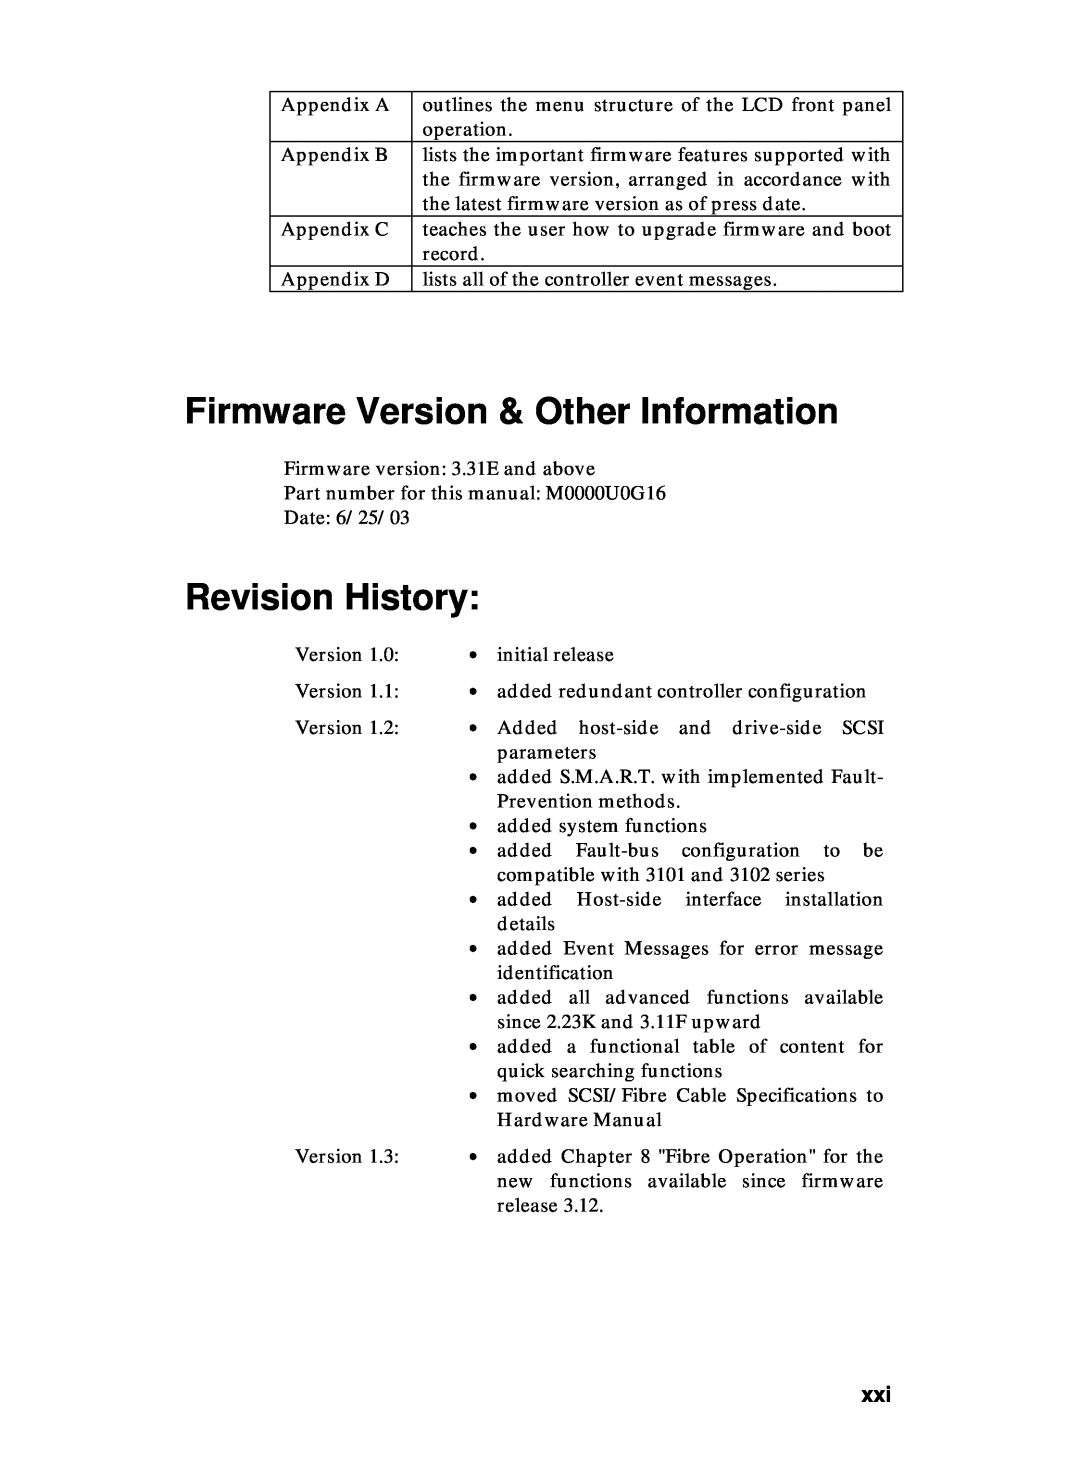 Compaq Infortrend manual Firmware Version & Other Information, Revision History 